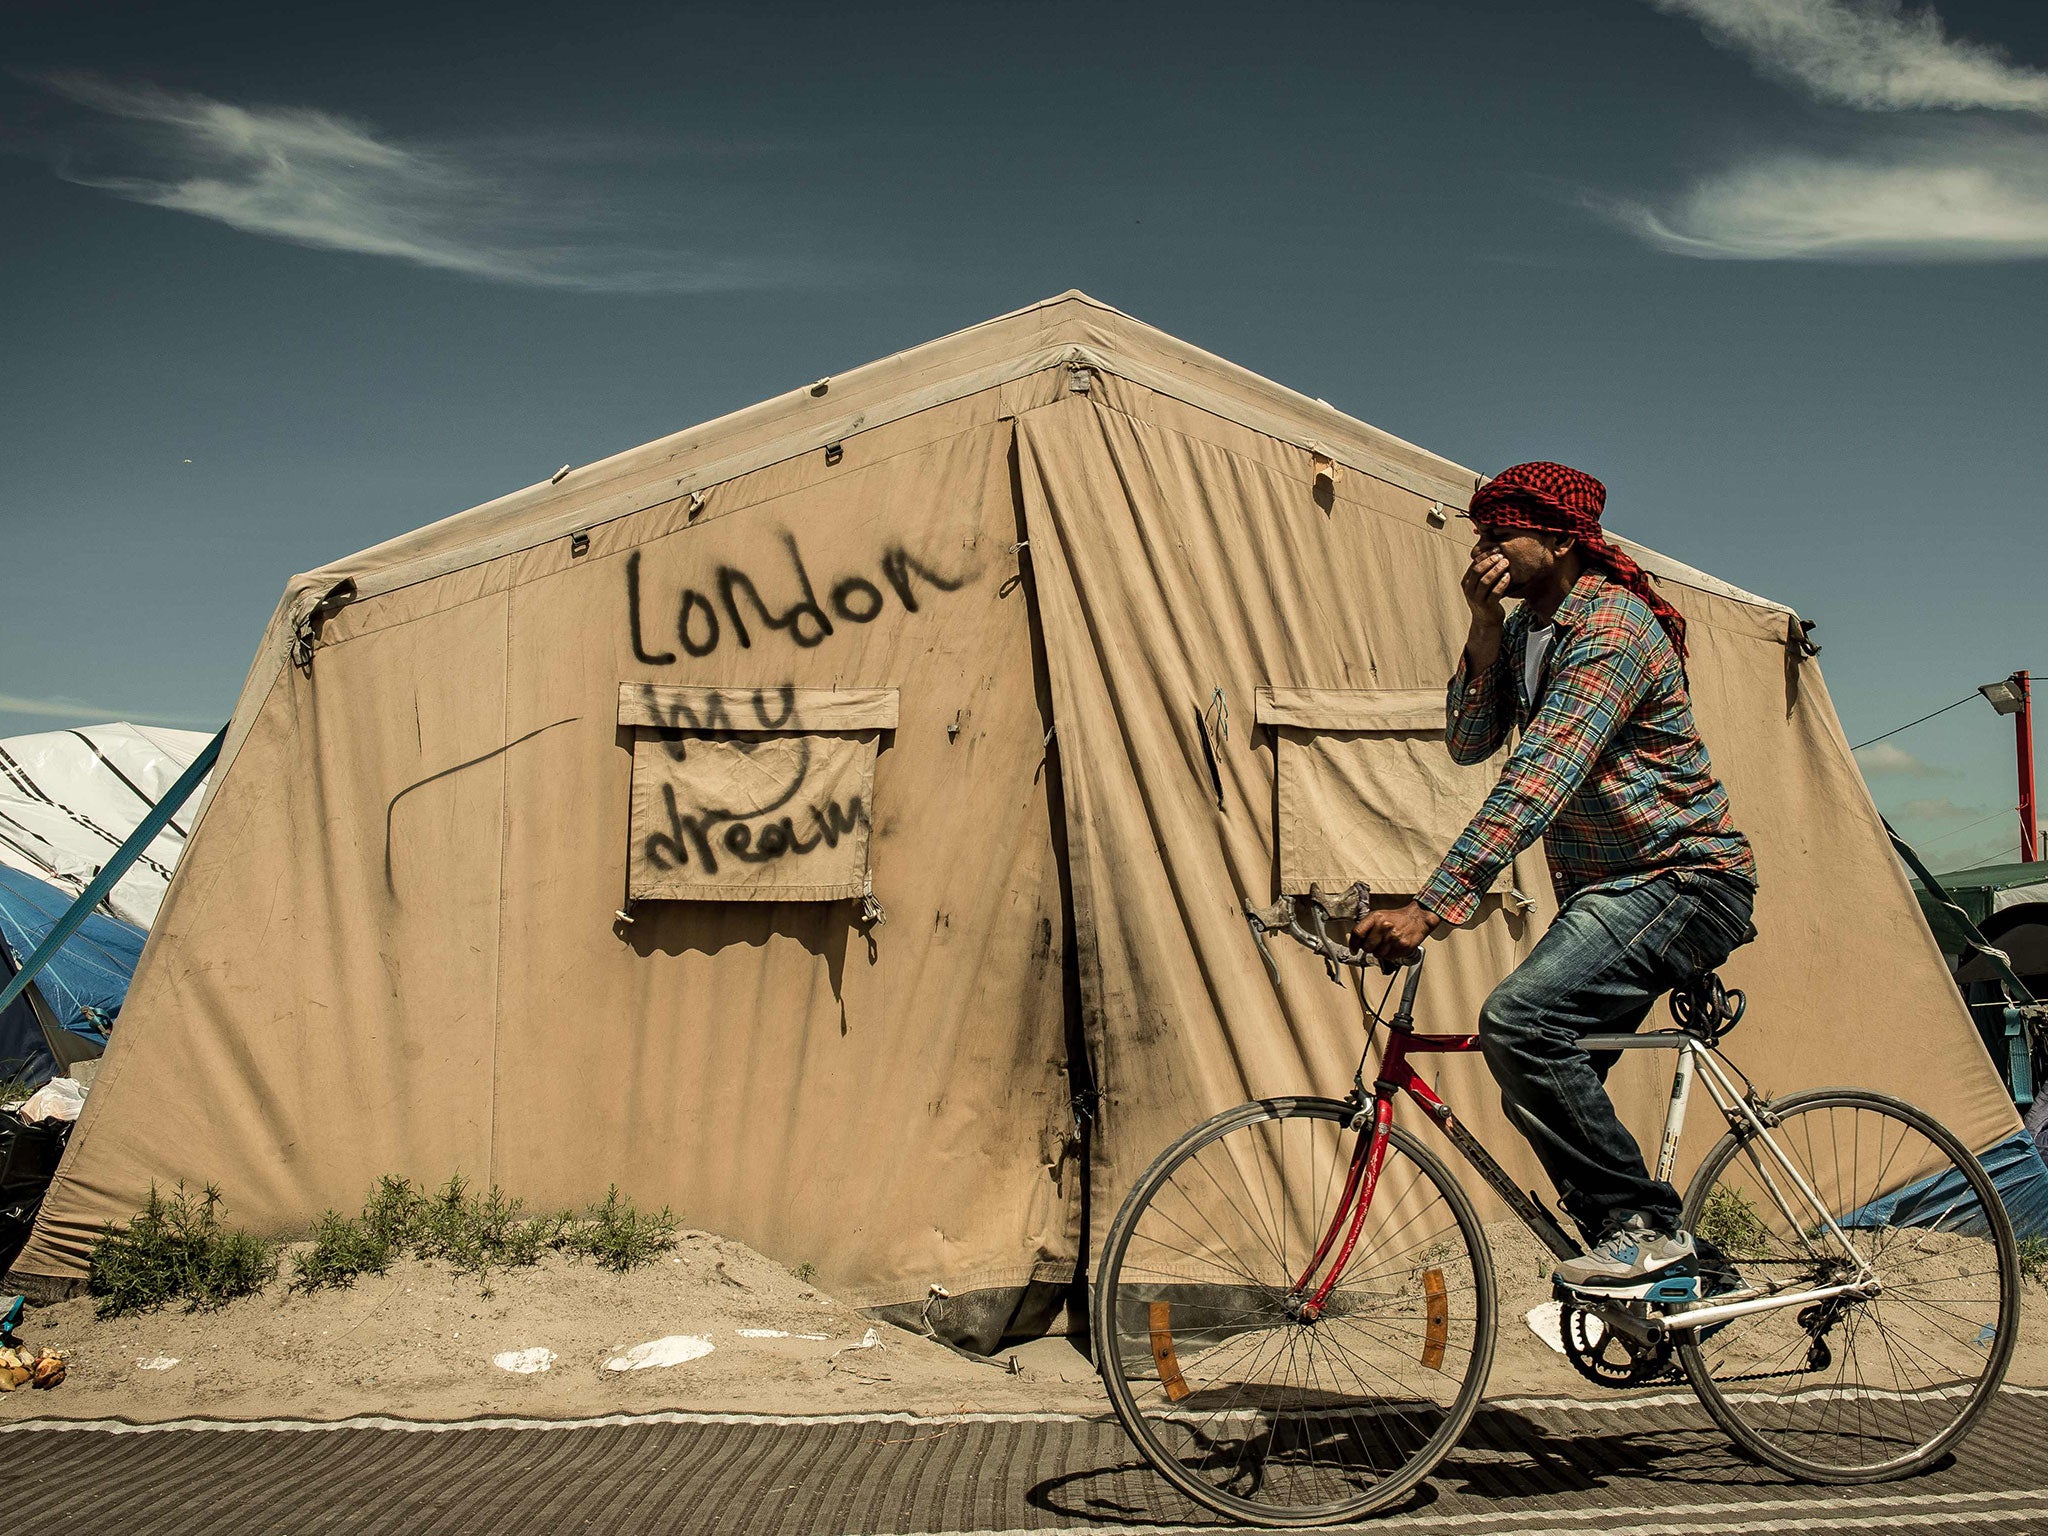 A migrant rides his bicycle inside the "Jungle" camp for migrants and refugees in Calais on June 24, the day after Britain voted to leave the EU. (AFP/Getty Images)